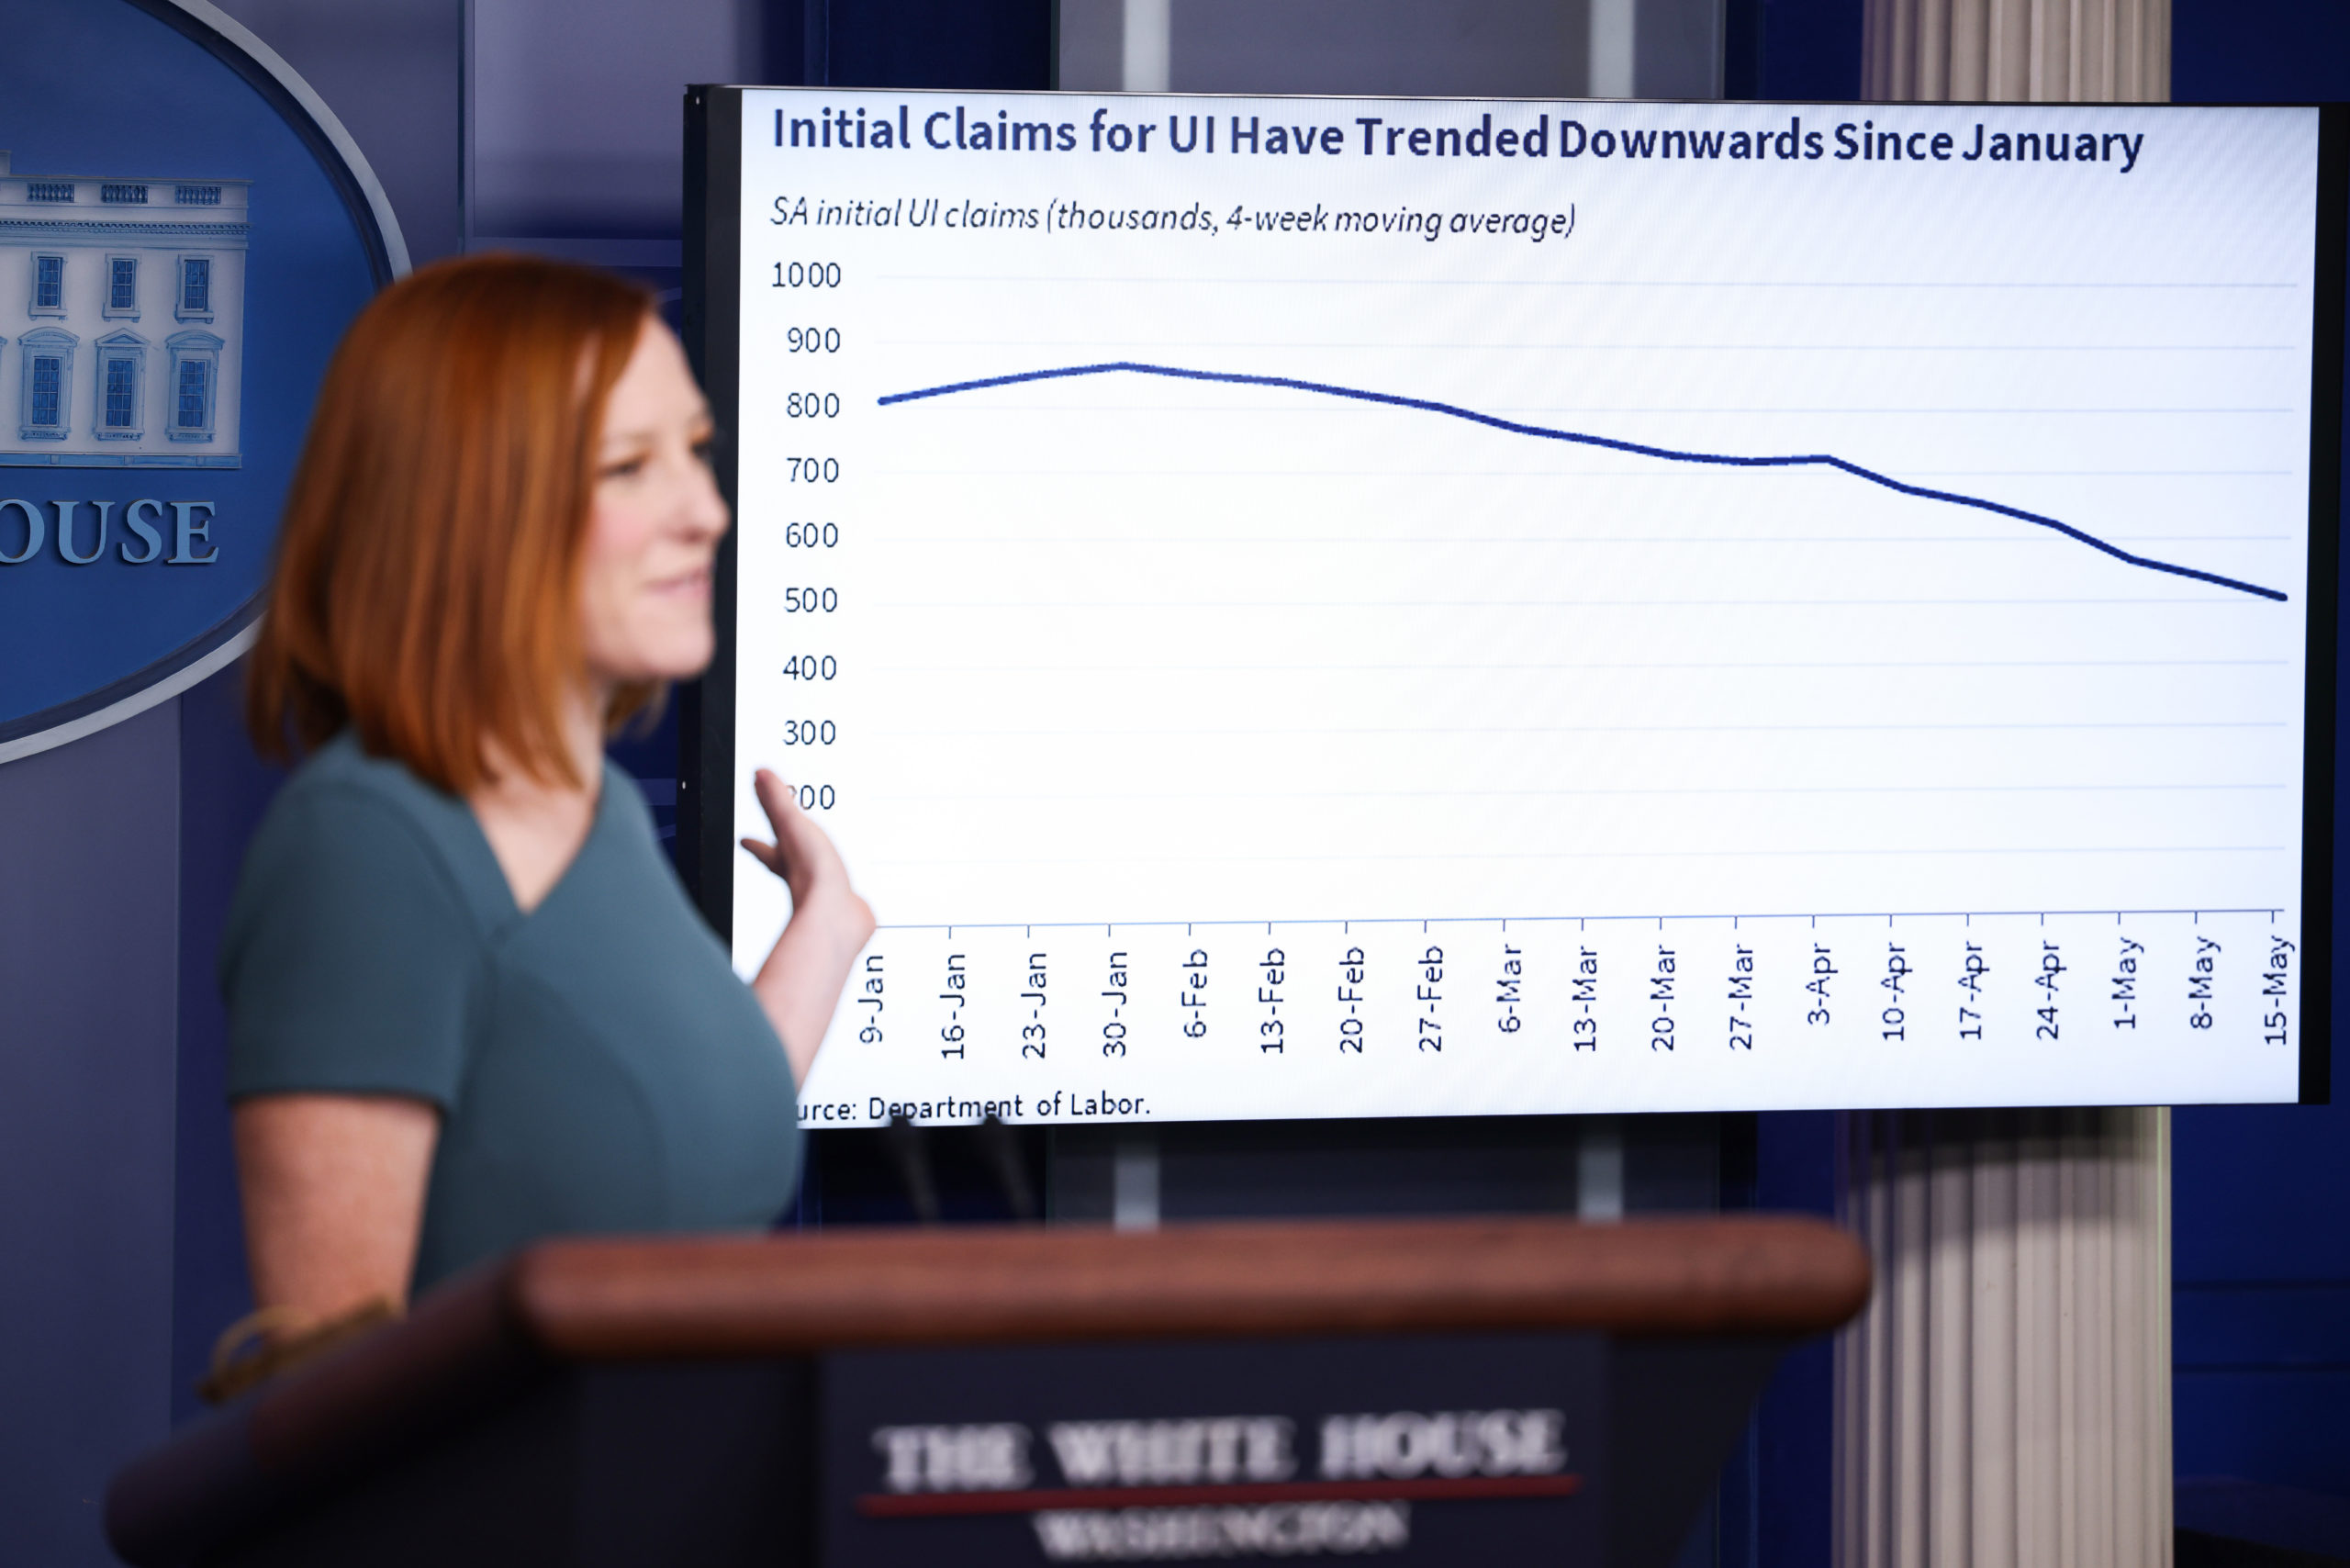 White House Press Secretary Jen Psaki gestures to a chart showing the rate of unemployment insurance claims on May 20. (Anna Moneymaker/Getty Images)